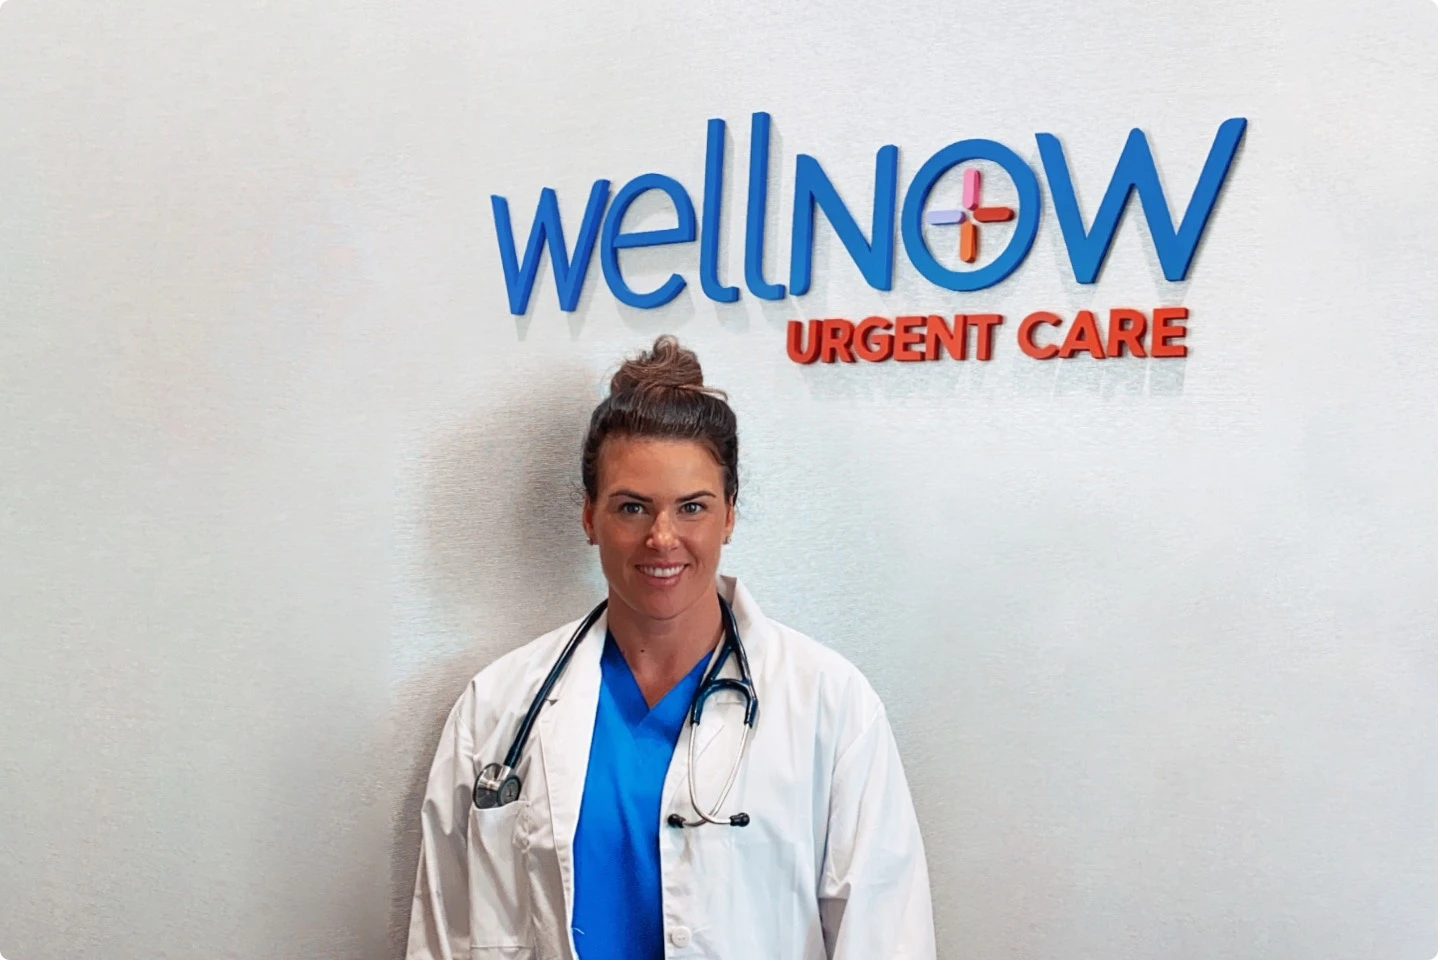 A WellNow Doctor stands in front of a WellNow clinic sign